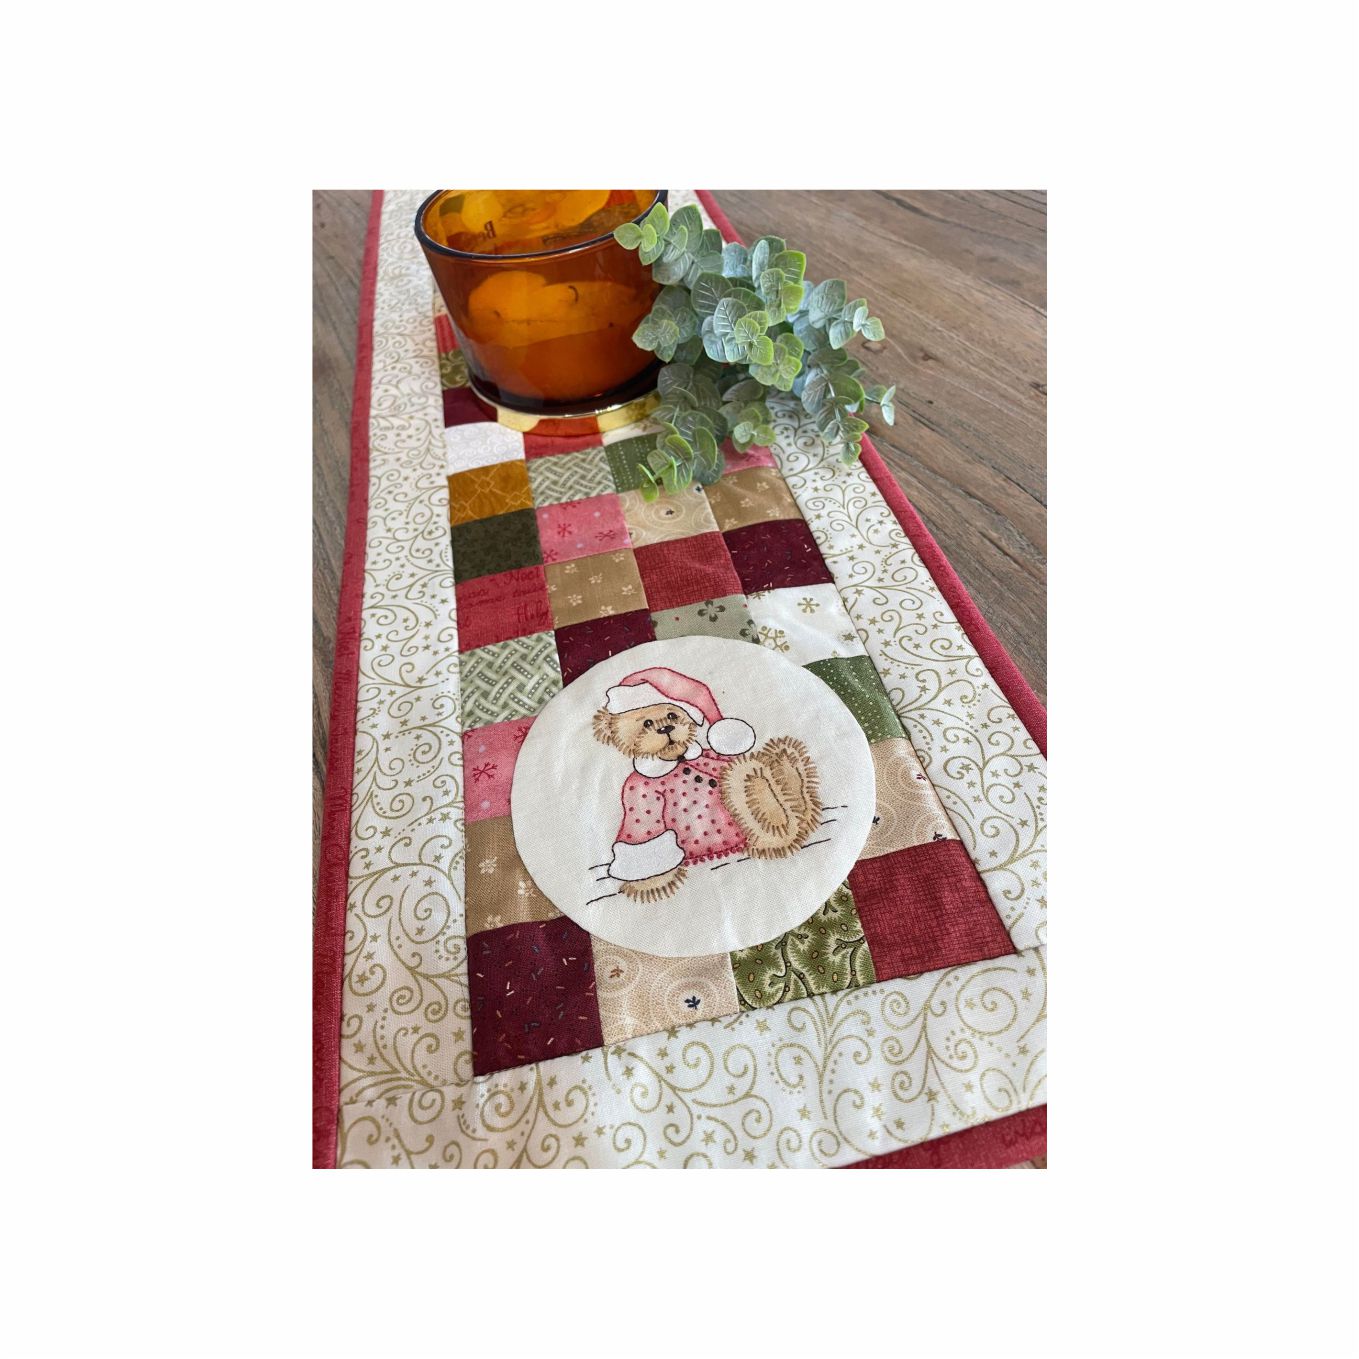 Christmas table runner pattern - Downloadable pattern